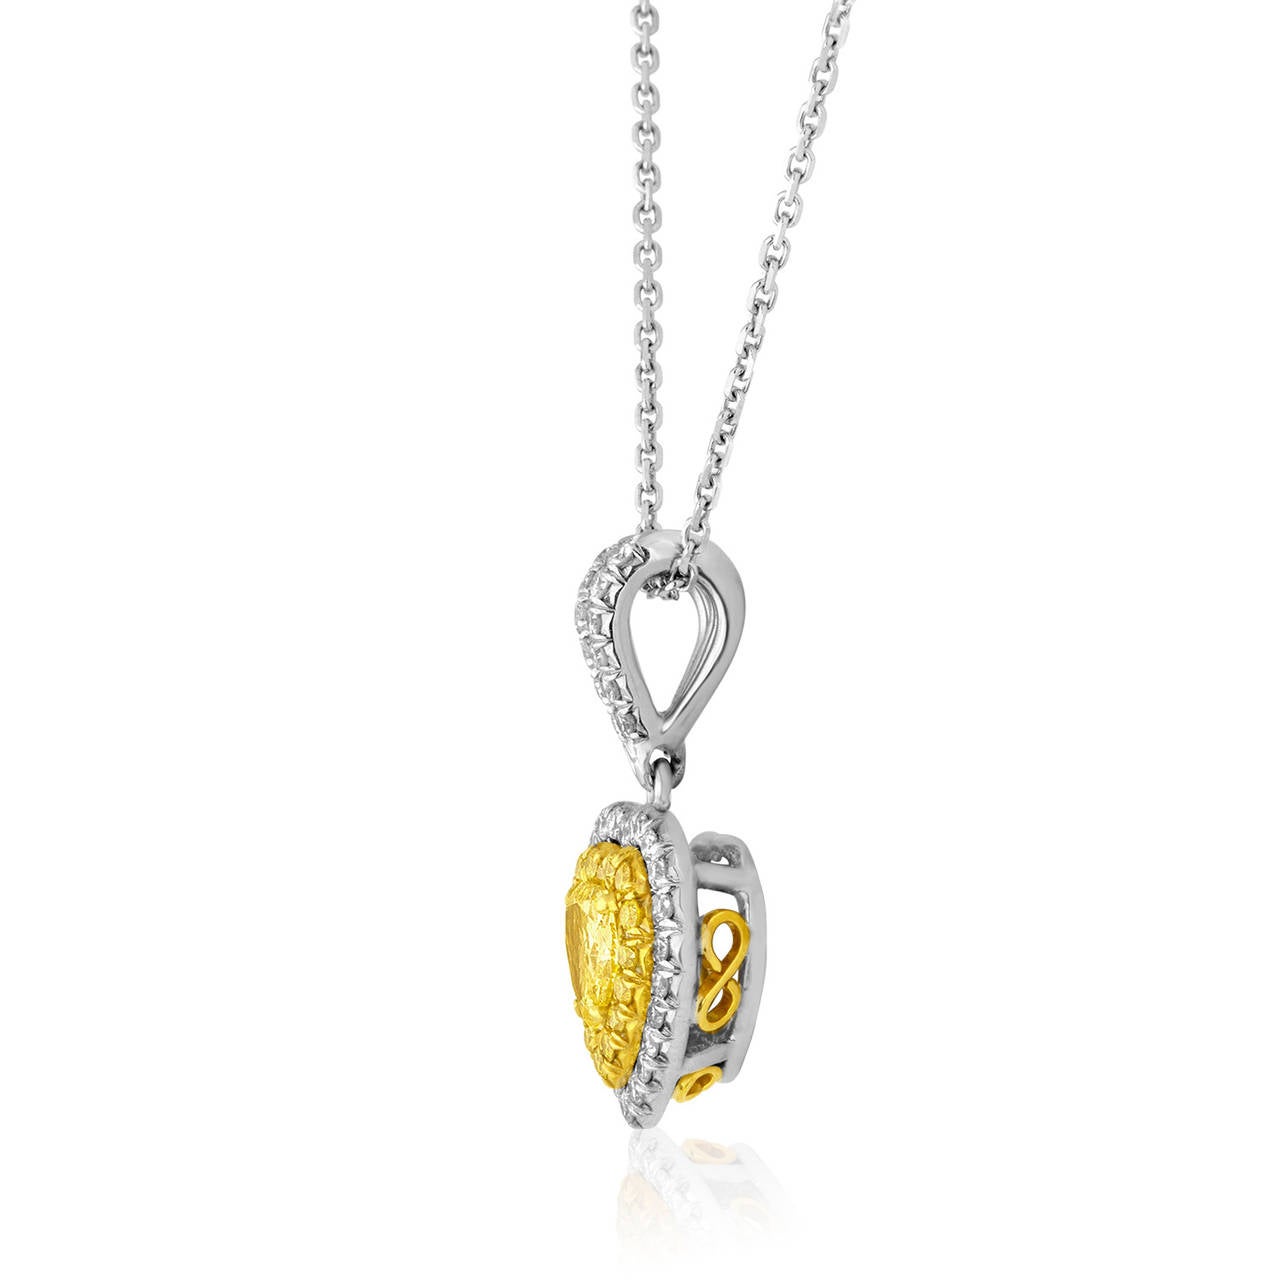 Beautiful Hand Made Necklace.
The pendant is 18K yellow and white gold.
The center stone is a FANCY INTENSE YELLOW 0.40 Carat Heart Cut Diamond VS.
The stone is surrounded by Fancy Yellow Diamonds 0.13ct VS.
There second row is 0.28 carat in white